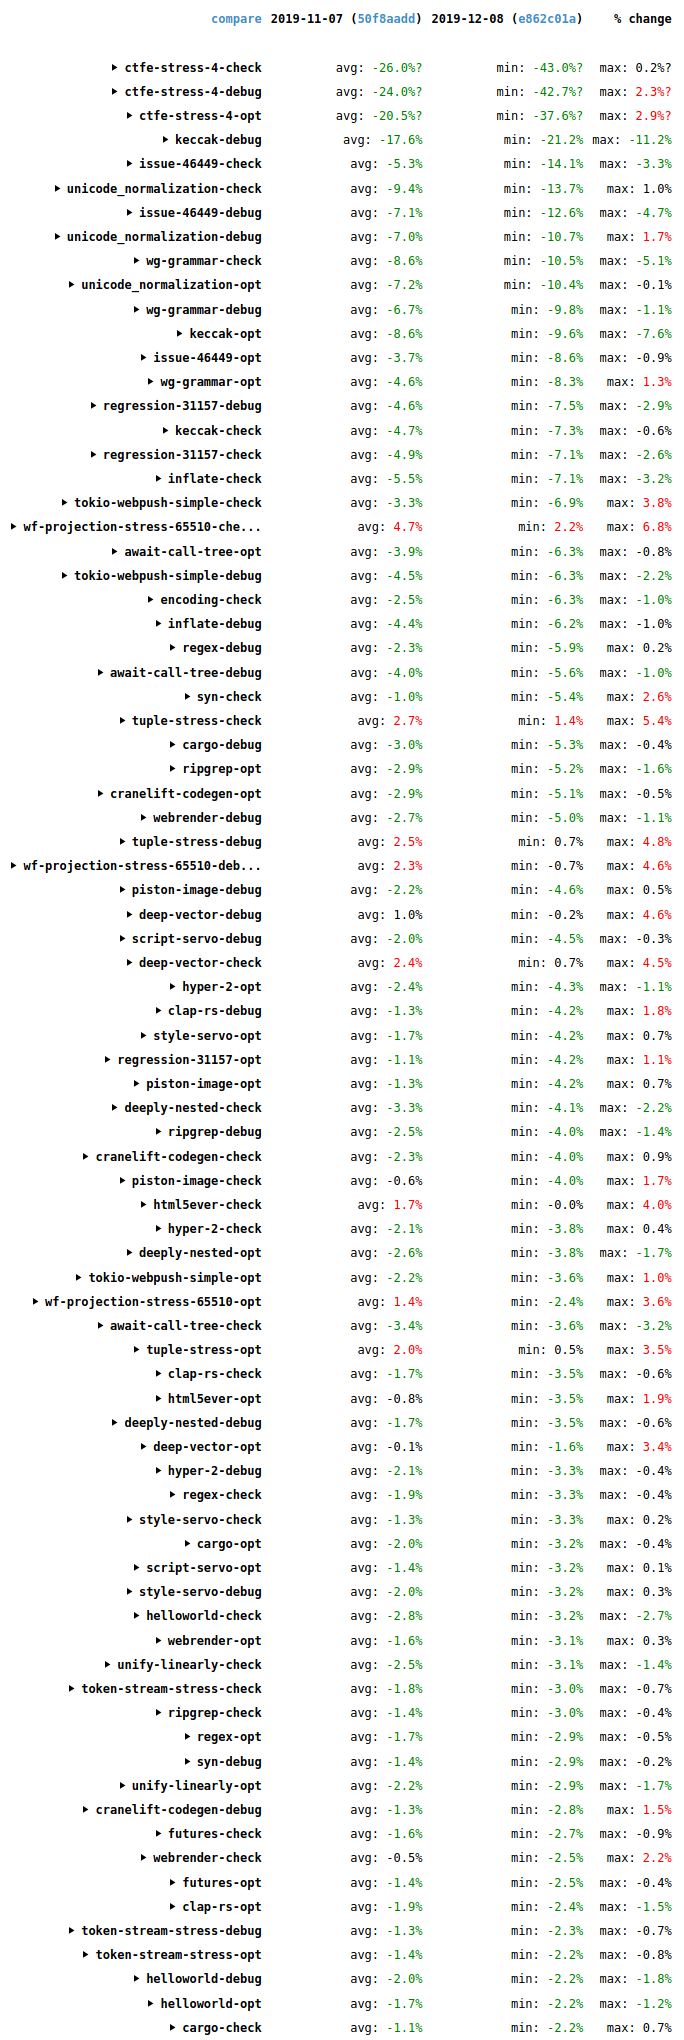 Walltime results from perf.rust-lang.org showing lots of benchmark improvements